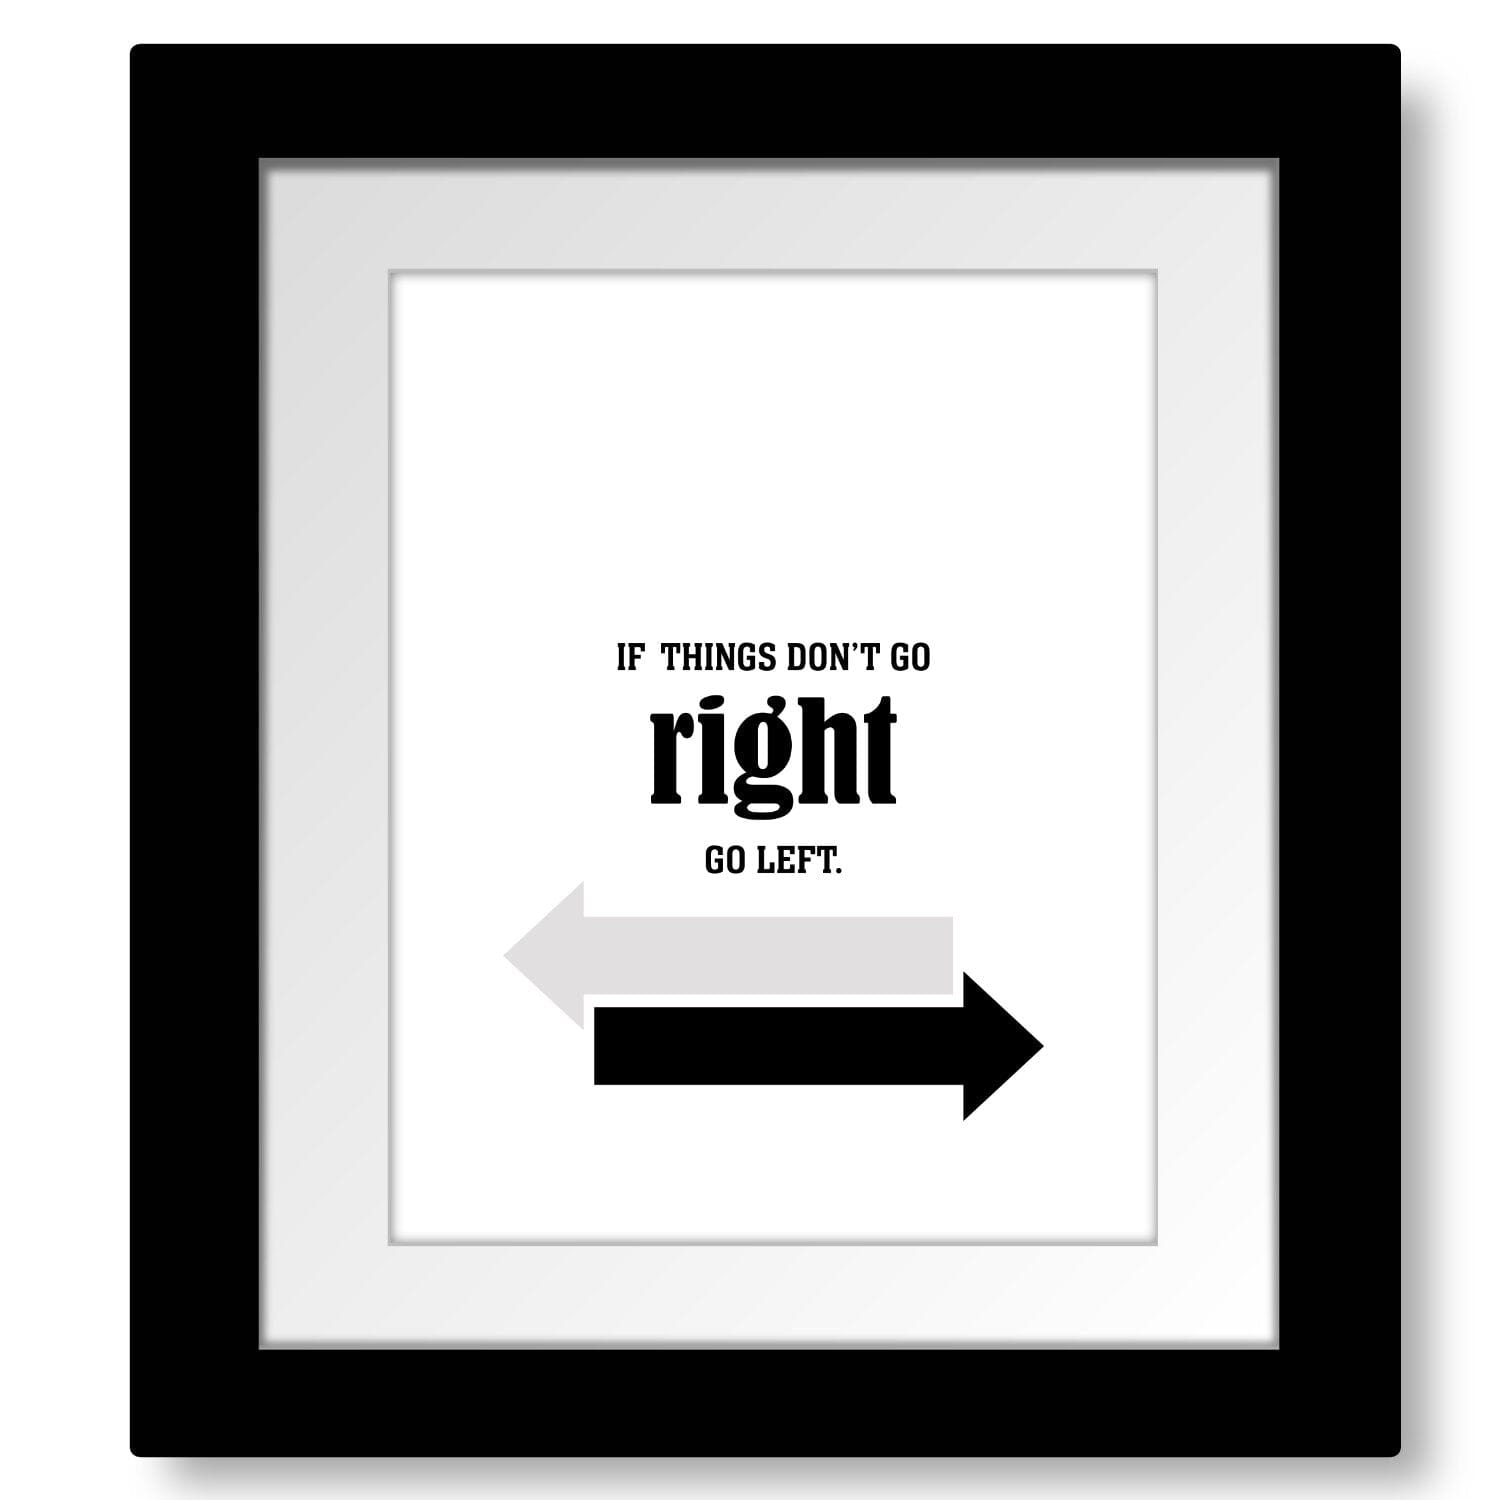 If Things Don't go Right, Go Left - Wise and Witty Word Art Wise and Wiseass Quotes Song Lyrics Art 8x10 Framed and Matted Print 